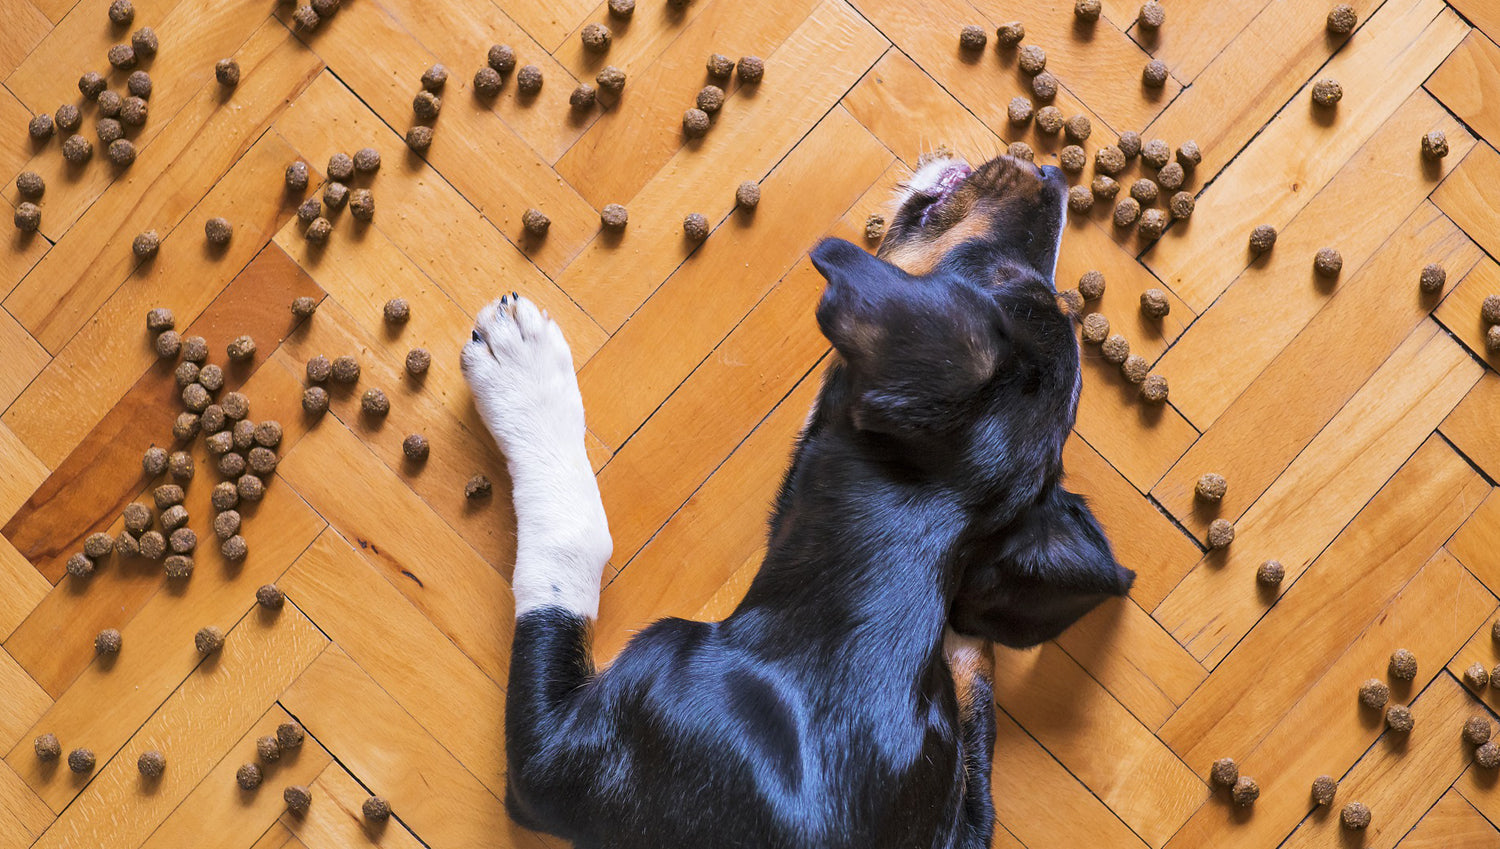 top down view of dog eating pieces of kibble scattered across a wooden floor